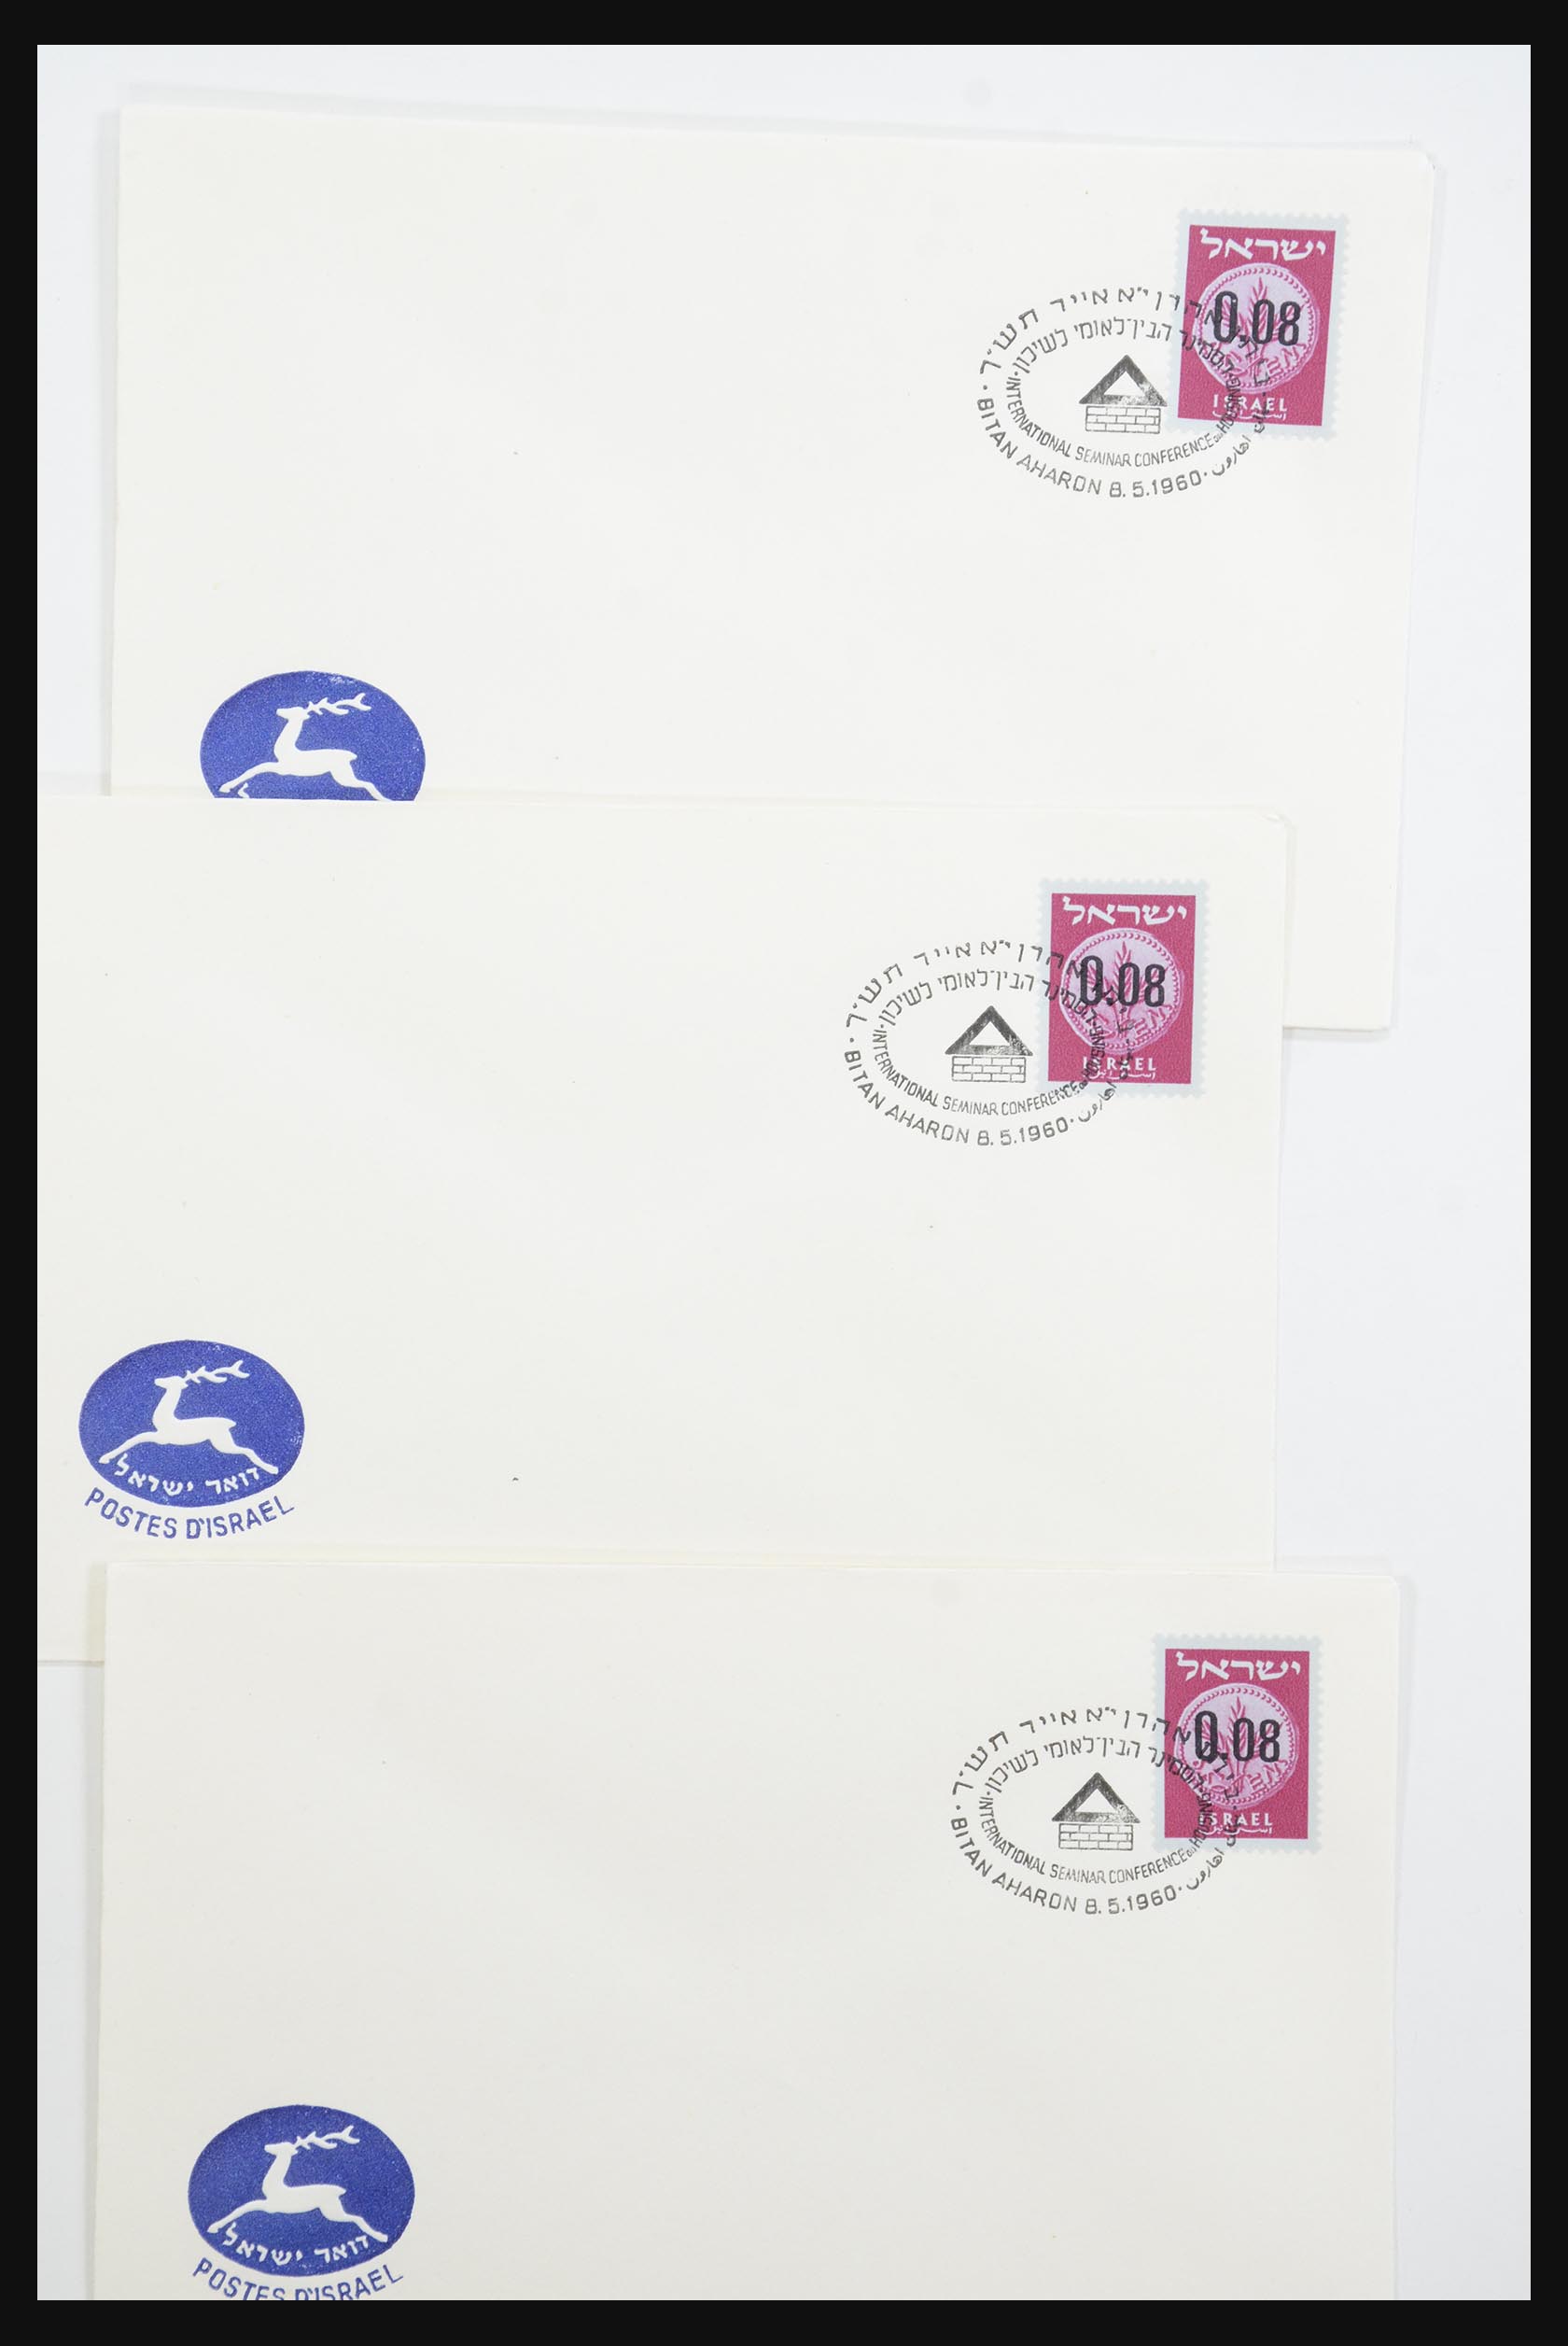 31924 080 - 31924 Israel first day cover collection 1957-2003.